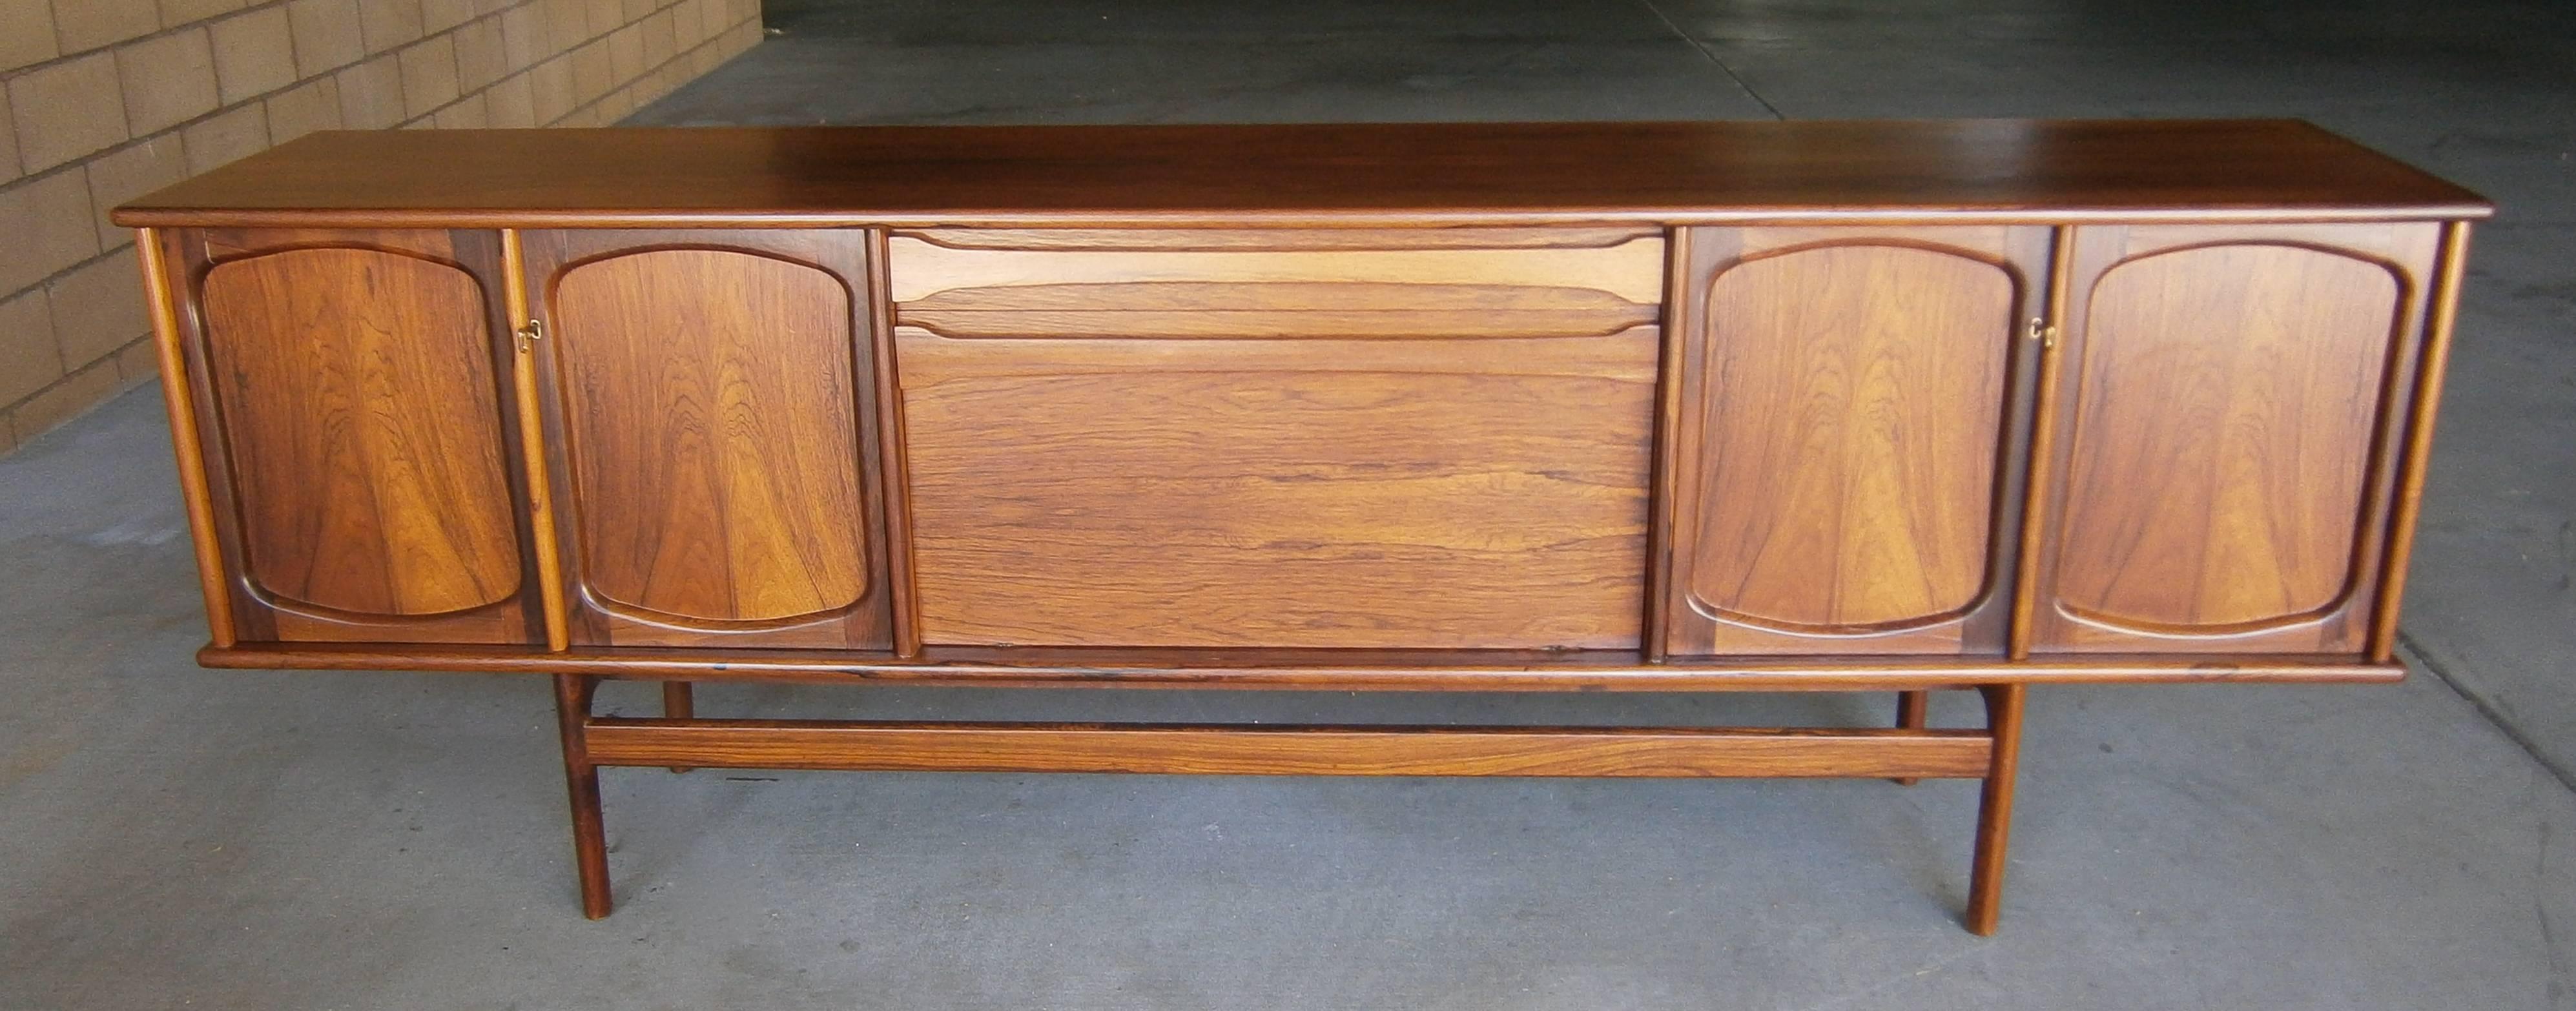 Outstanding Norwegian Rosewood Sideboard Attributed  to Gerhard Berg C.1960 In Excellent Condition For Sale In Palm Springs, CA